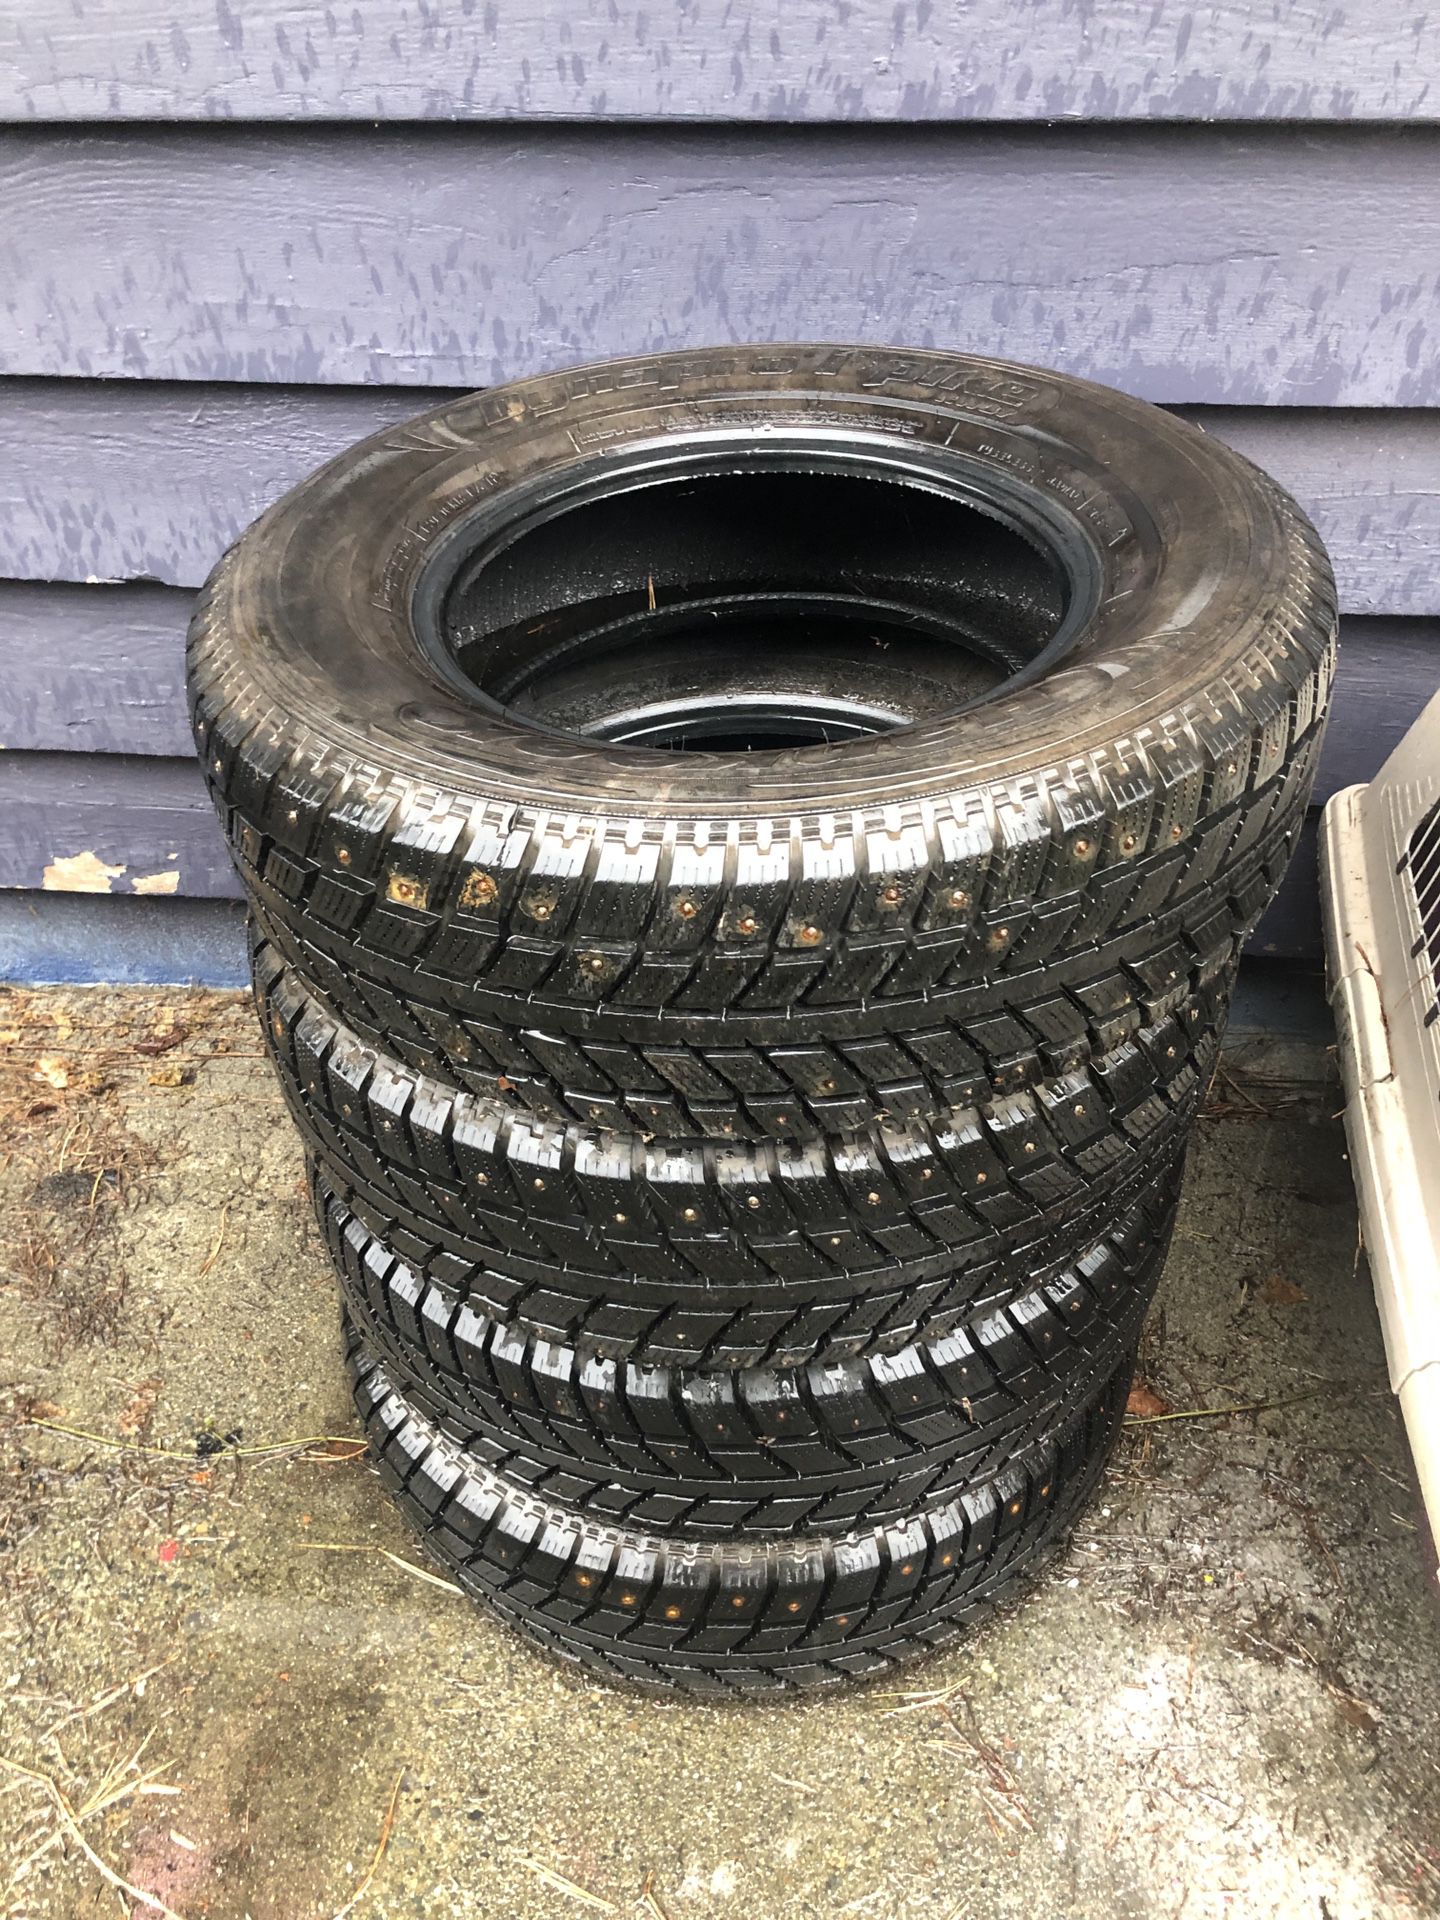 Pending pick up-Four free studded snow tires -west Seattle